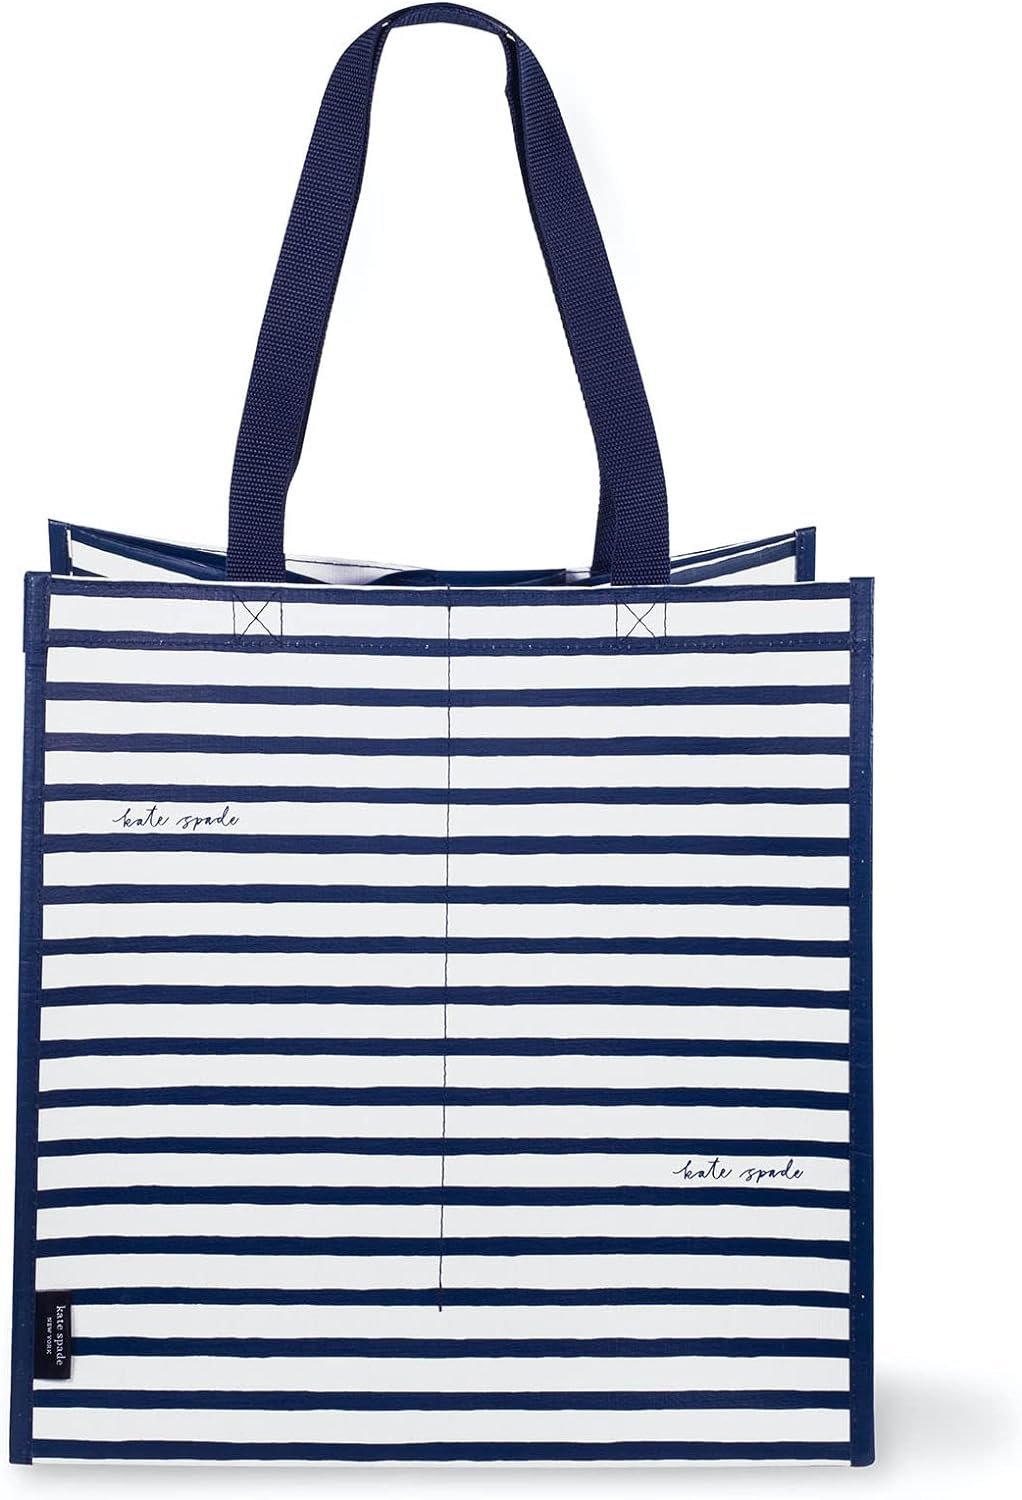 Kate Spade New York Reusable Shopping Bag, Grocery Tote with Shoulder Straps, Large Collapsible Tote